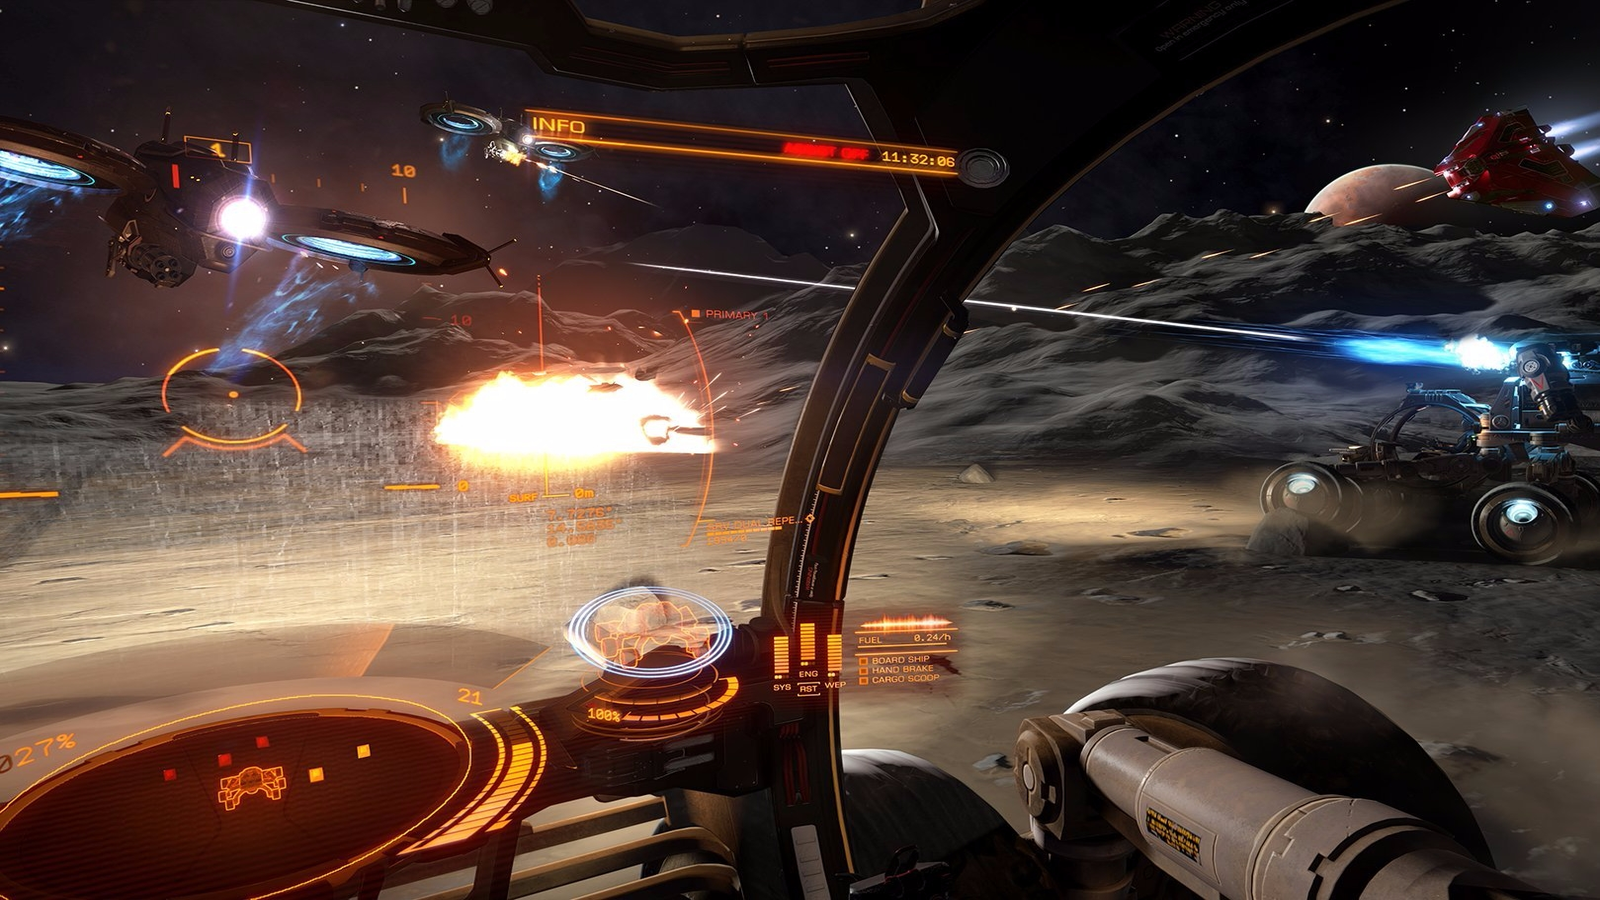 Elite: Dangerous hits 1.0, is now available to the public